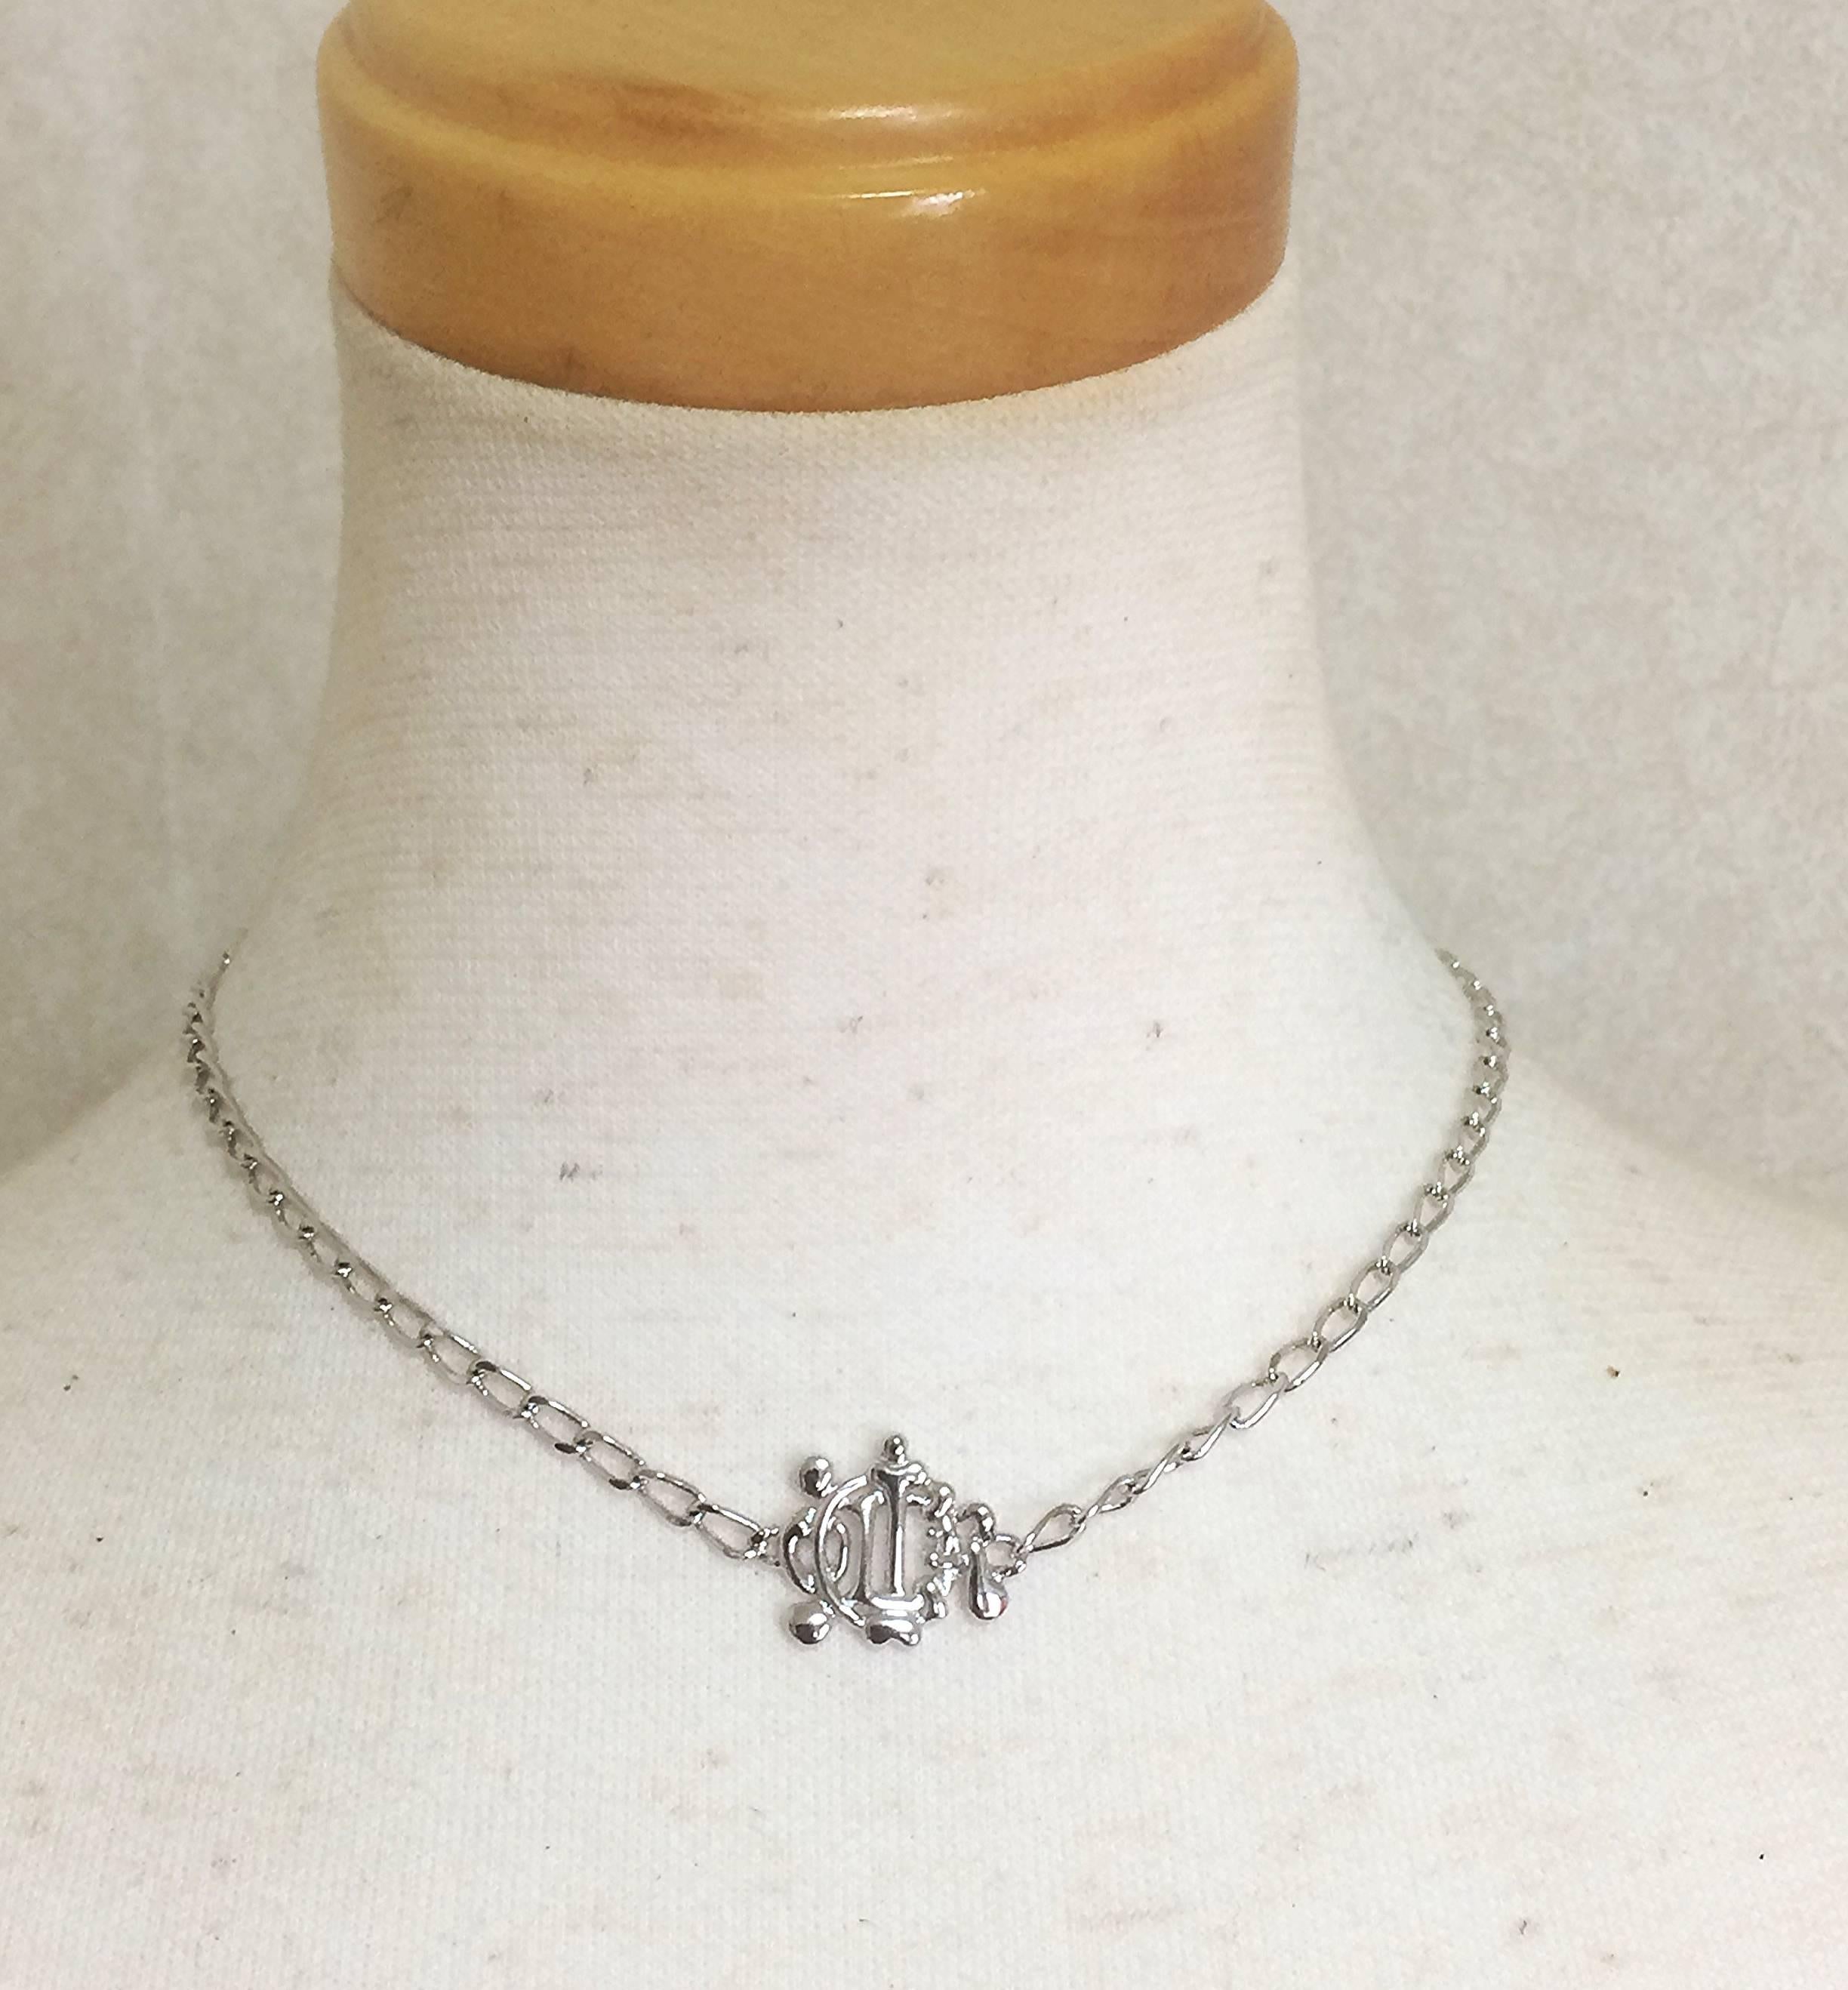 1990s. MINT. Vintage Christian Dior silver tone chain necklace with logo motif design pendant top. Perfect Dior vintage jewelry gift.

MINT, excellent vintage condition like NEW.
Don't miss.

This is a vintage silver tone chain necklace with